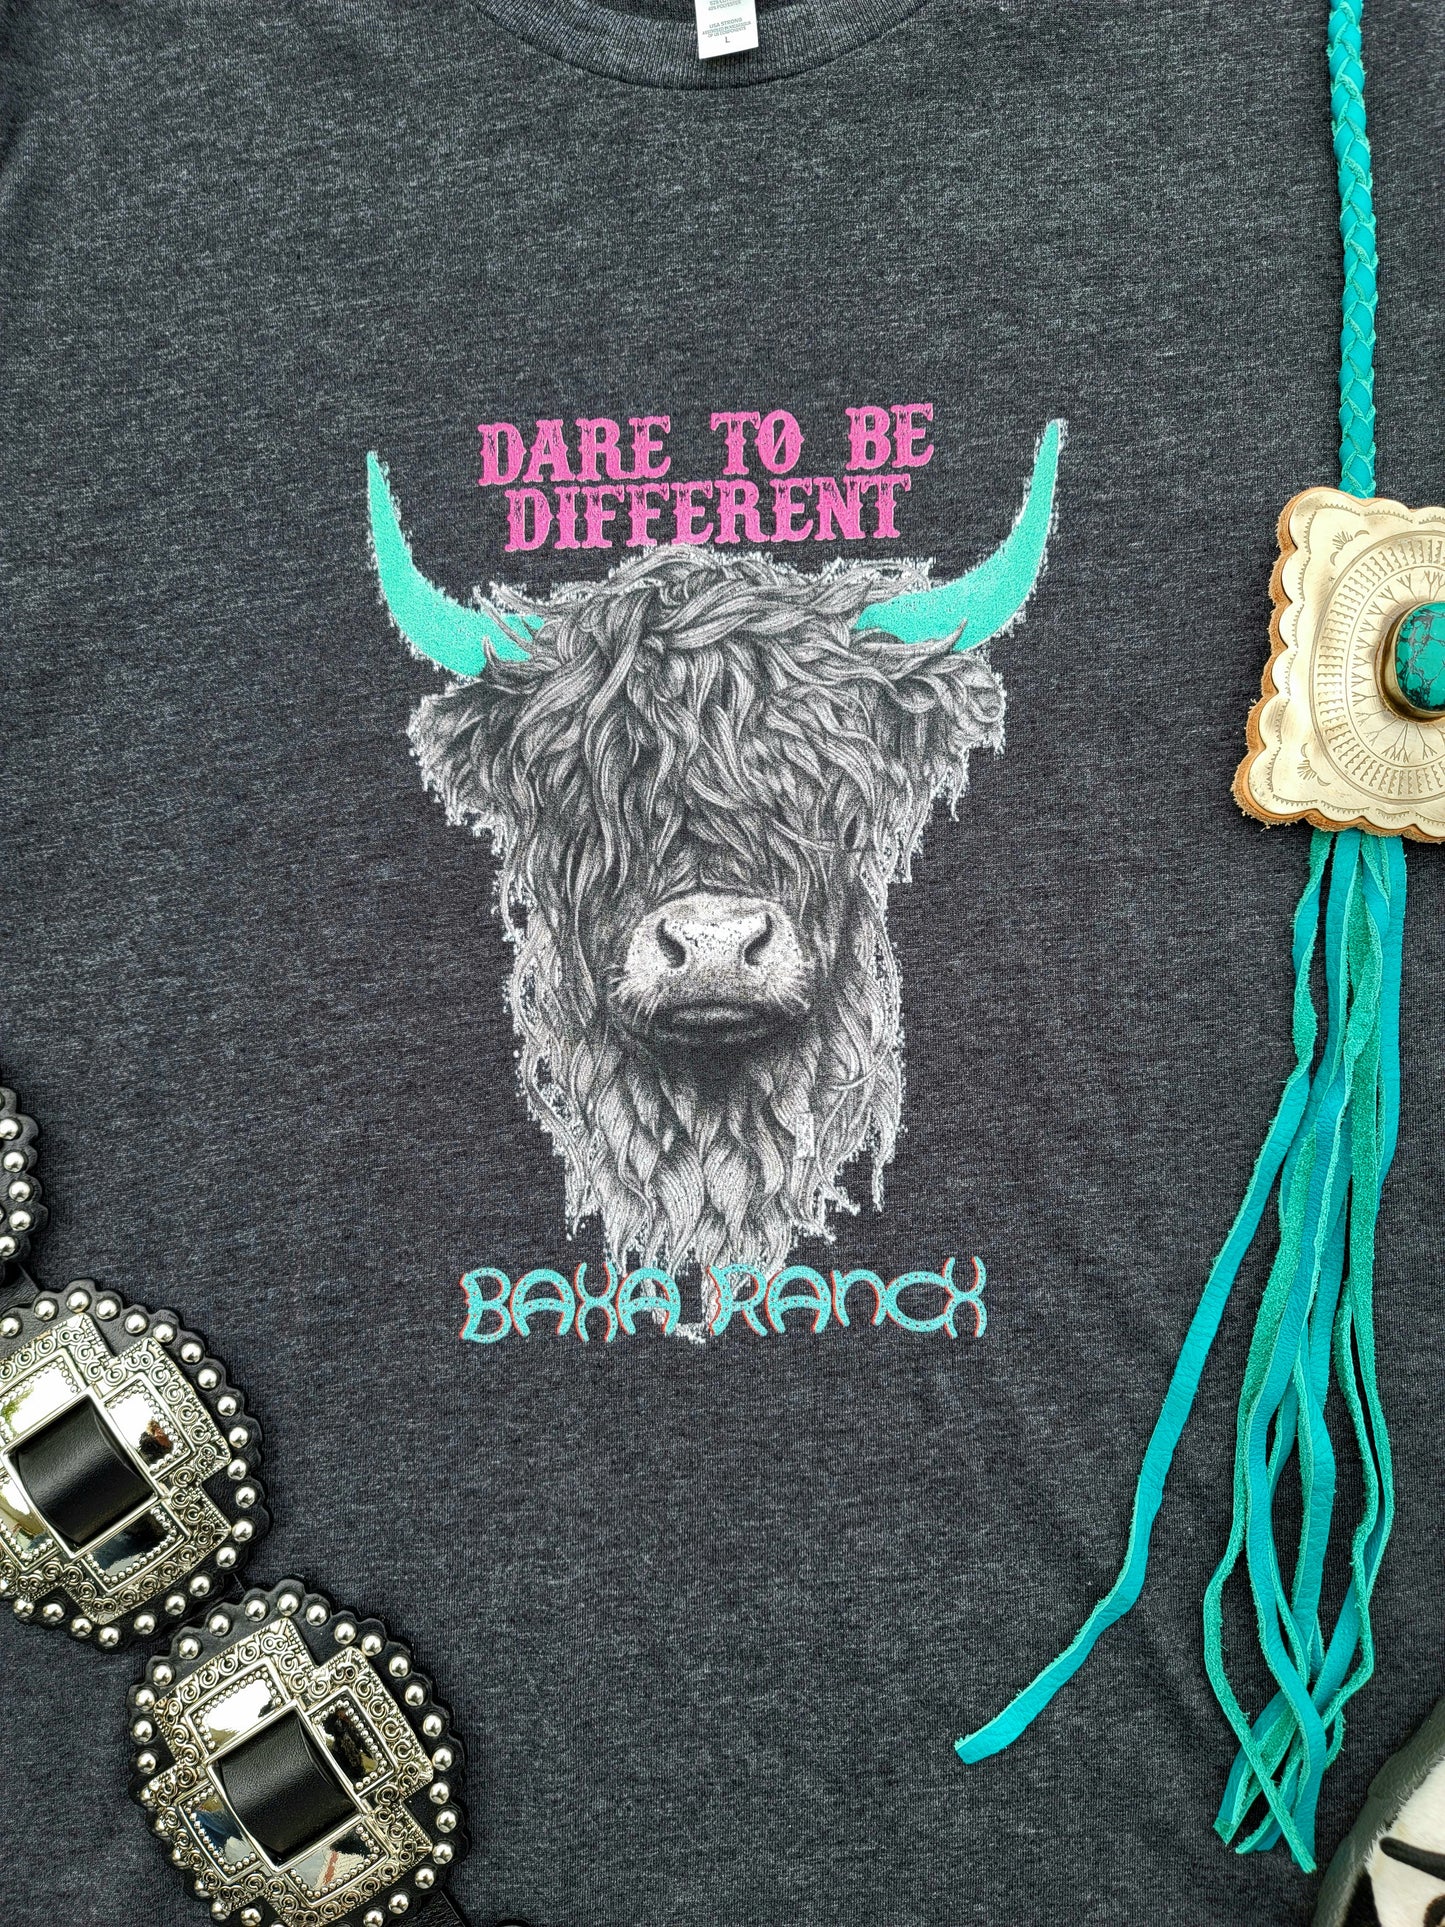 Dare To Be Different Highland Cow Tee - baha ranch, baha ranch logo, dare, dare to be different, graphic tee, hairy cows, hairycow, highland, highland cow, highland cows, highlandbull, highlandcattle, highlandcow, highlandcows, highlander, highlanders, highlands, higland cow, tee, tshirt, unisex, unisex tee -  - Baha Ranch Western Wear